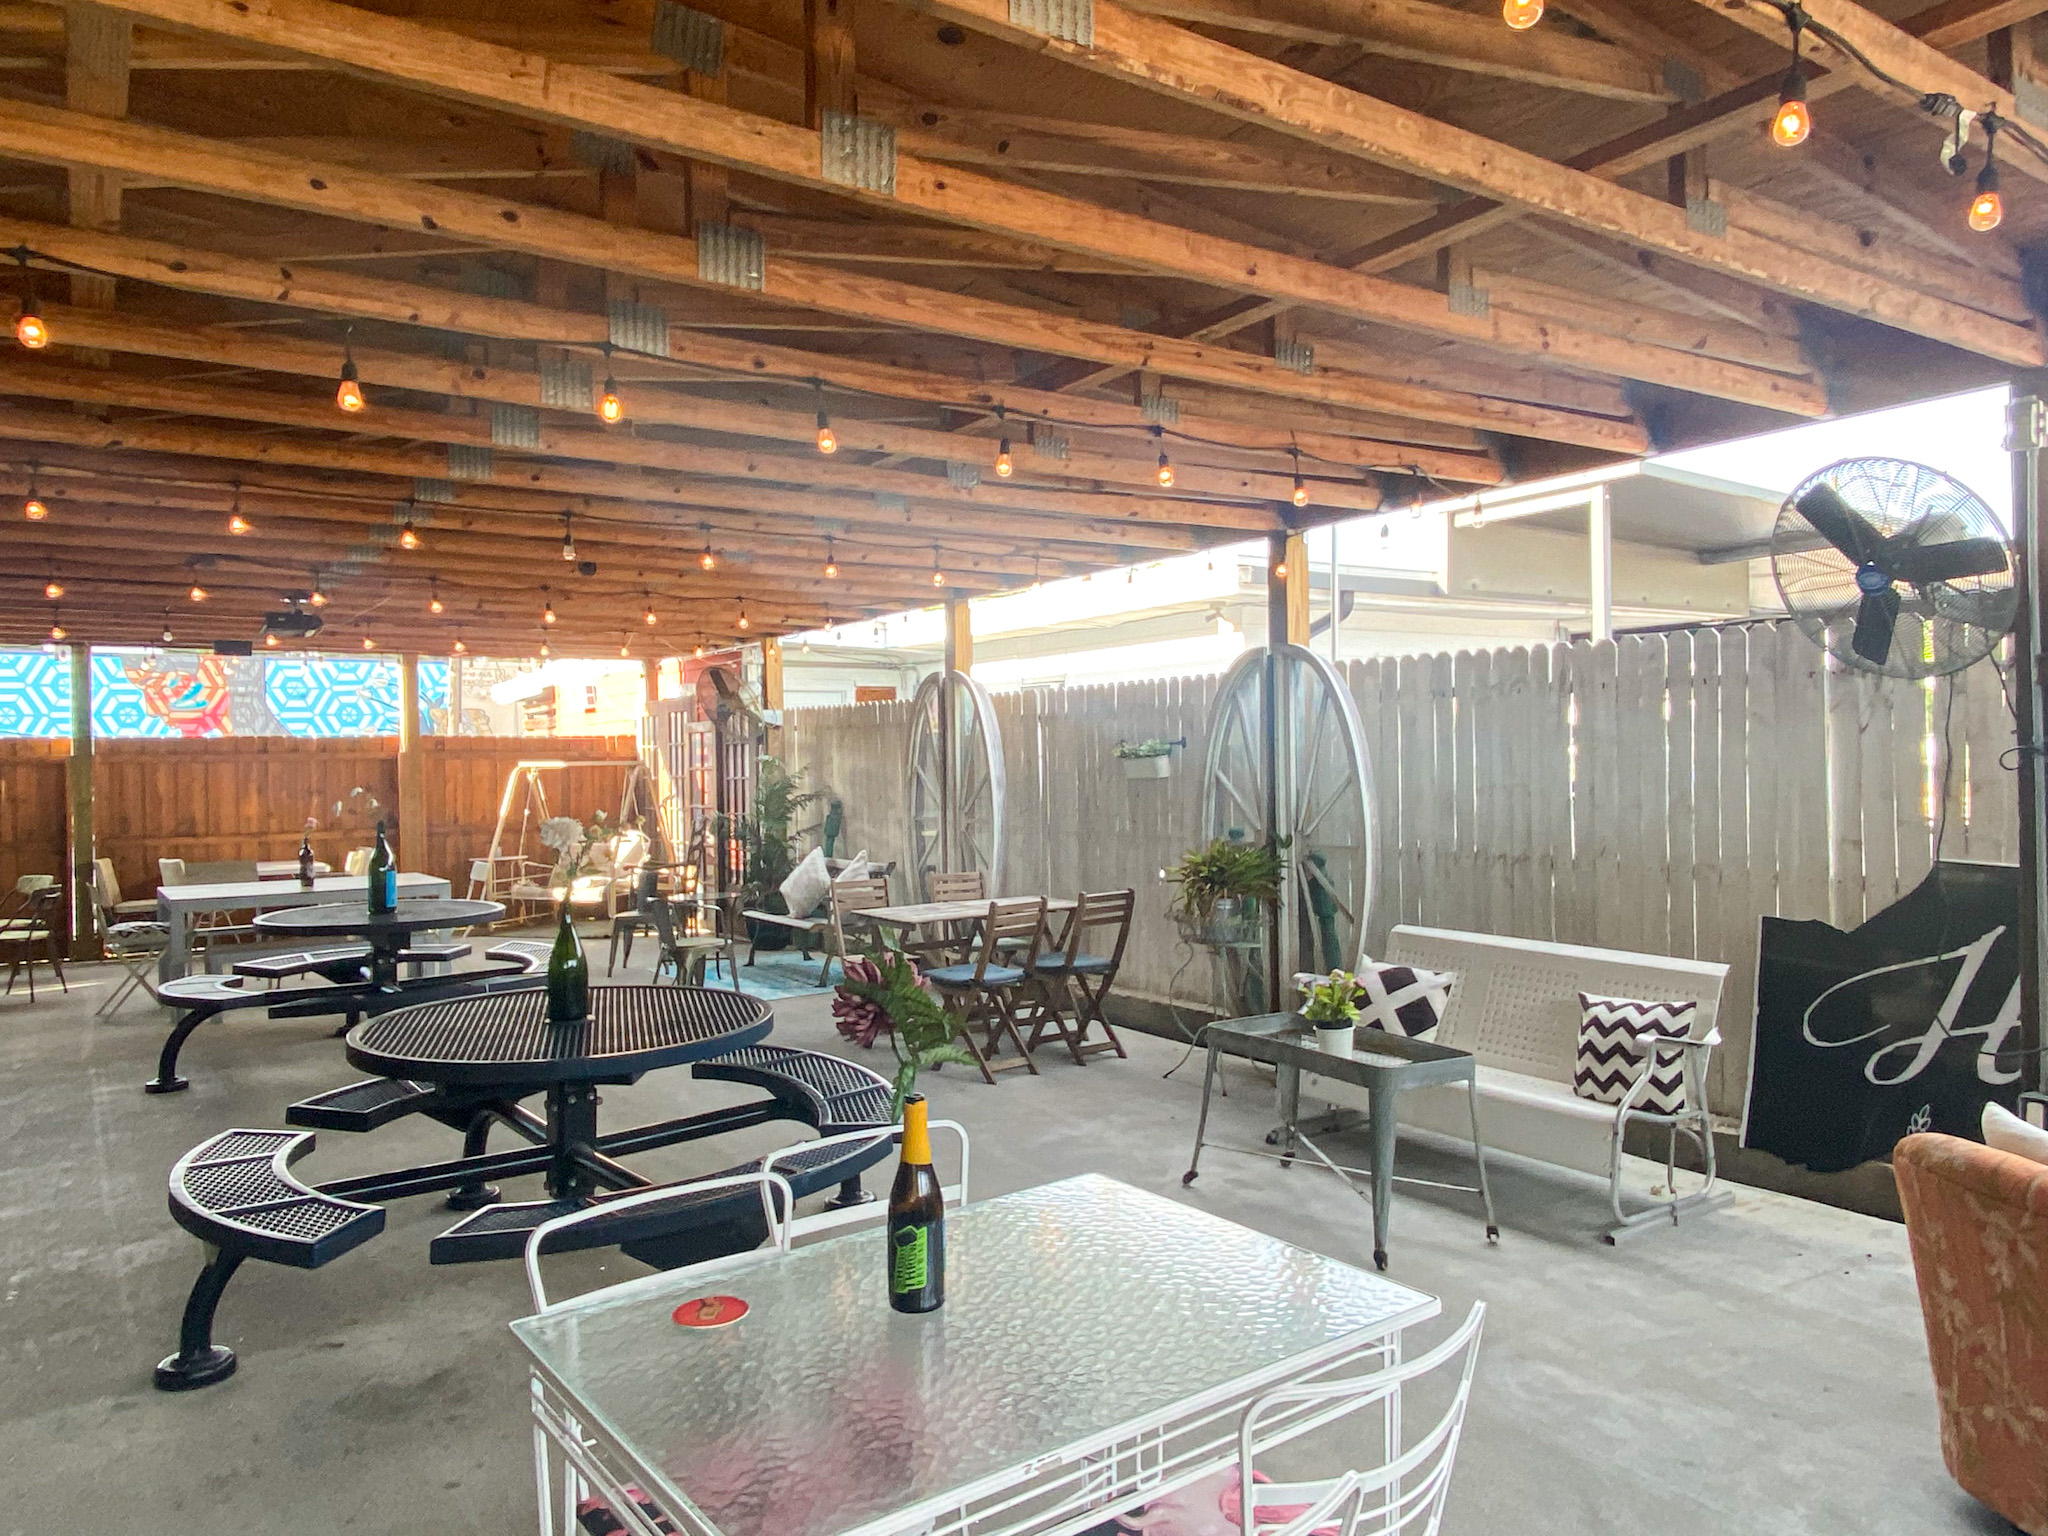 Spacious patio which is available to rent for private events